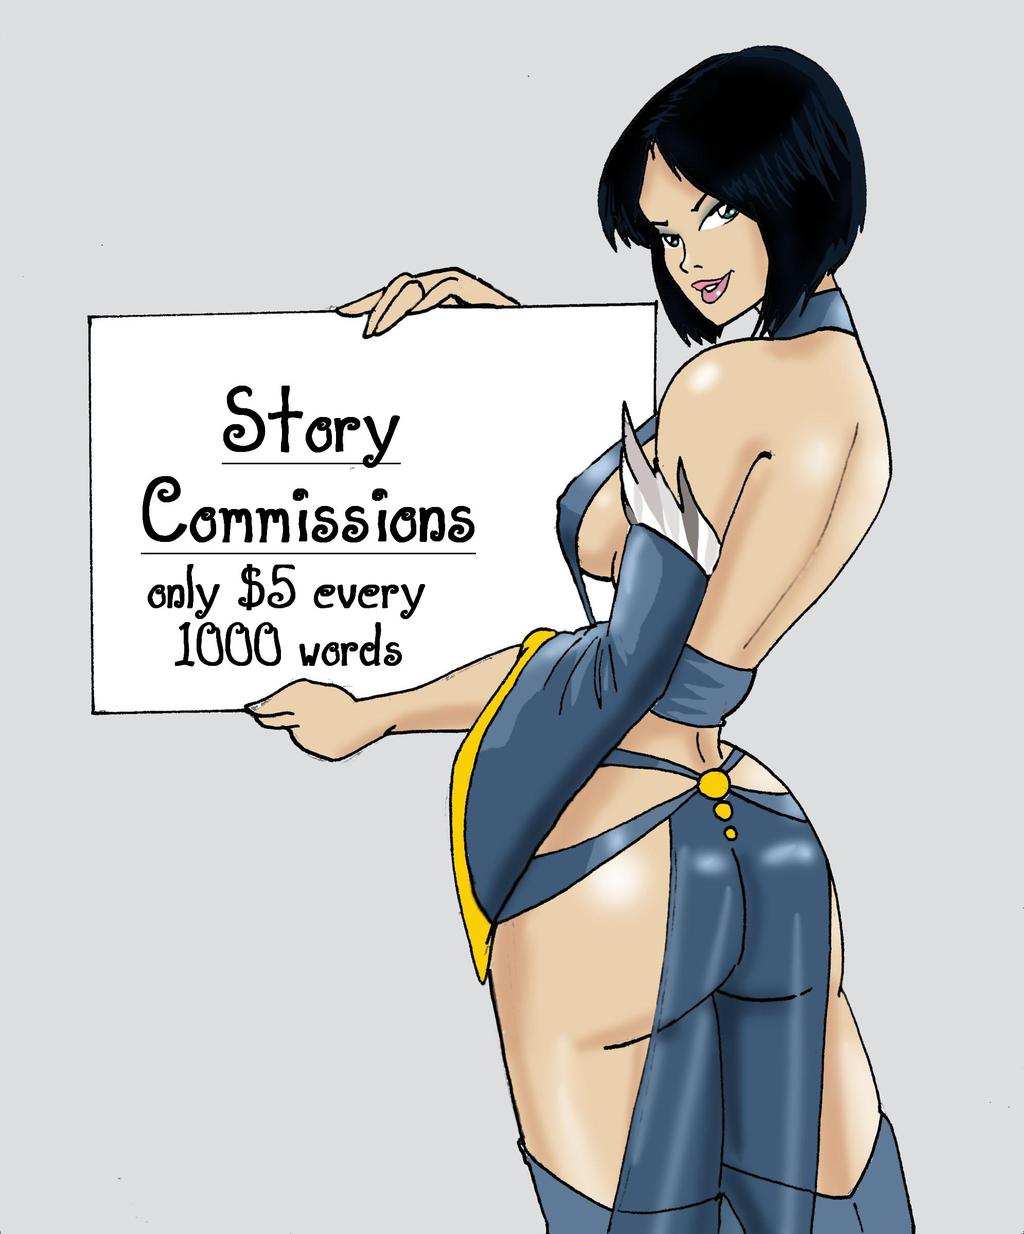 Featured image: Commissions anyone?